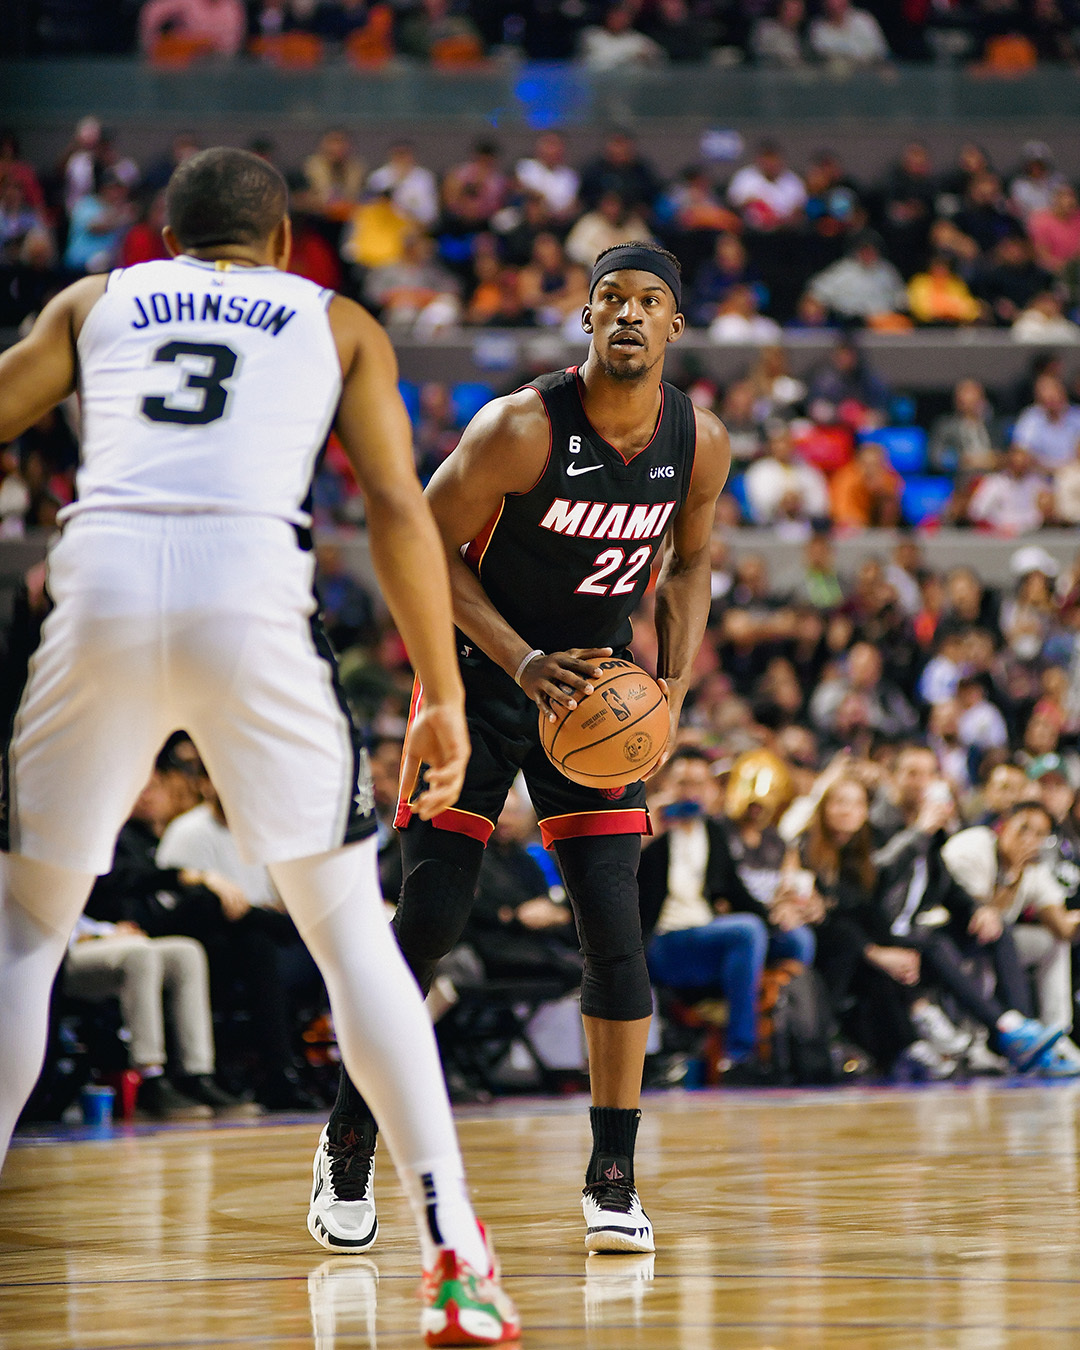 Heat Overcome Deficit And Defeat Spurs In Mexico City Game - VAVEL USA